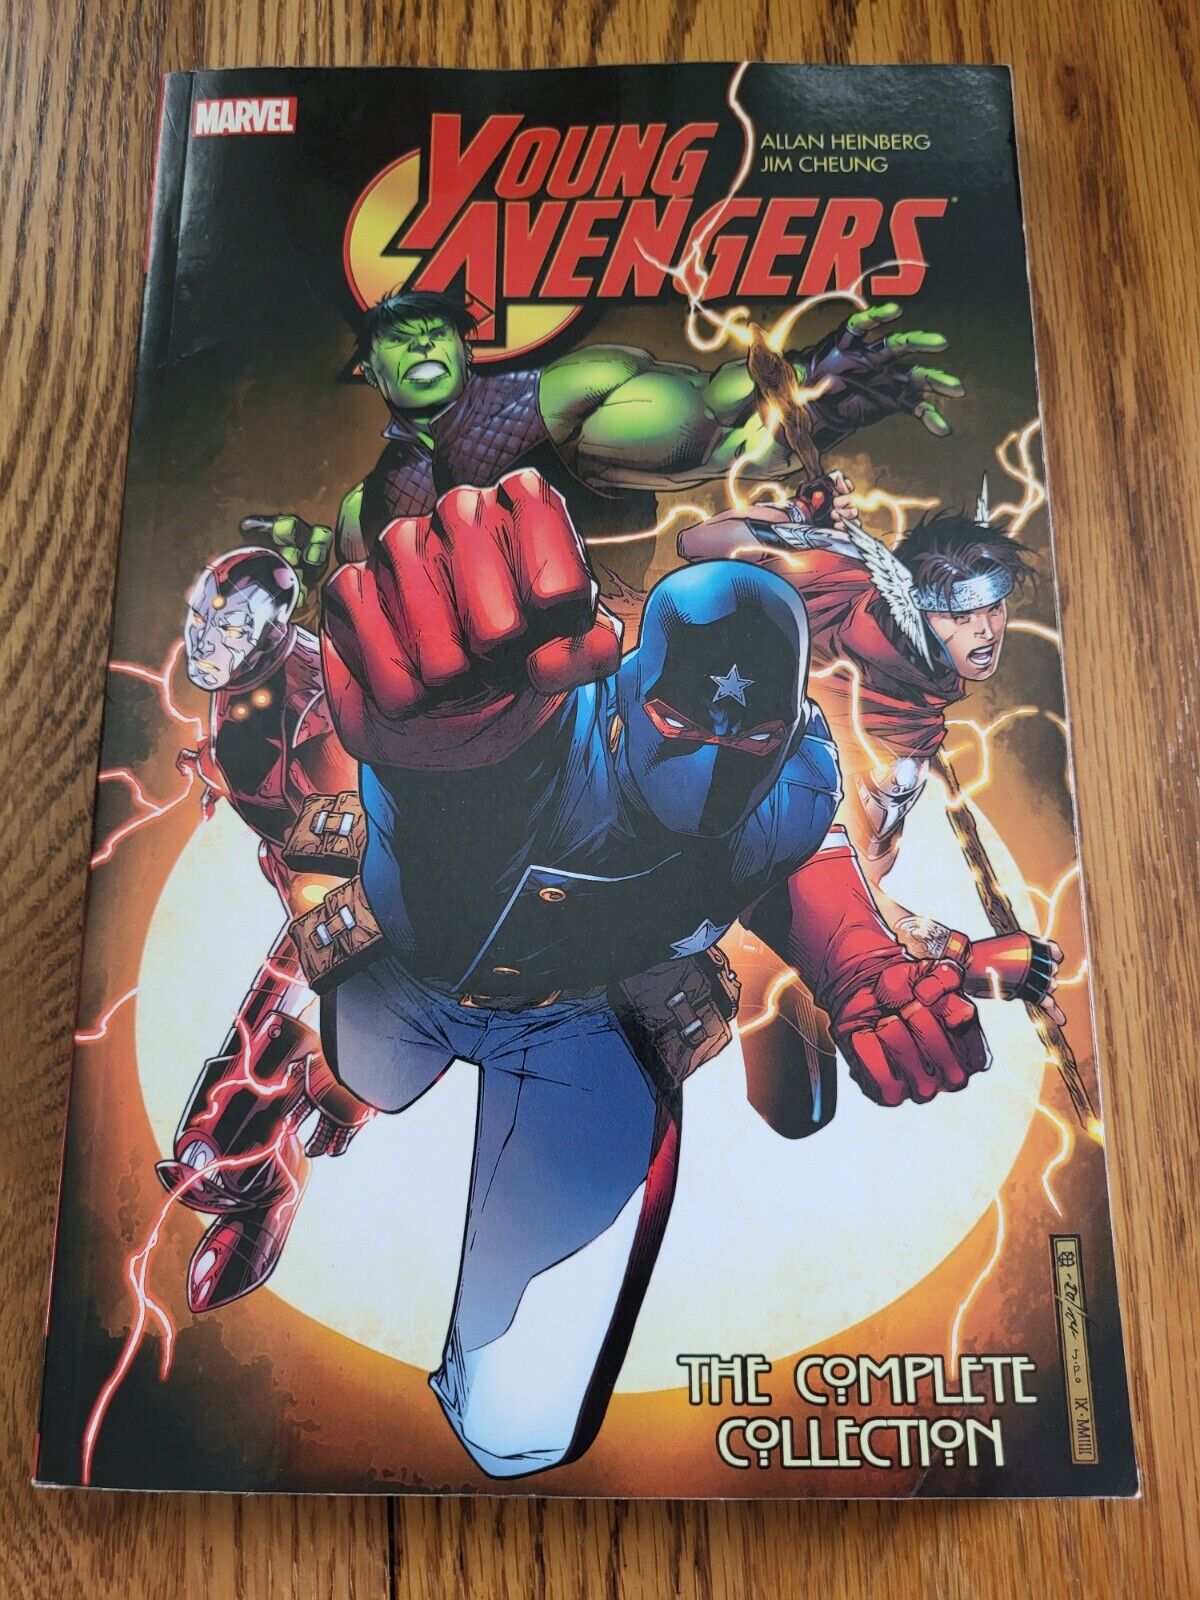 Marvel Comics Young Avengers by Allan Heinberg - Complete Collection (TPB, 2016)